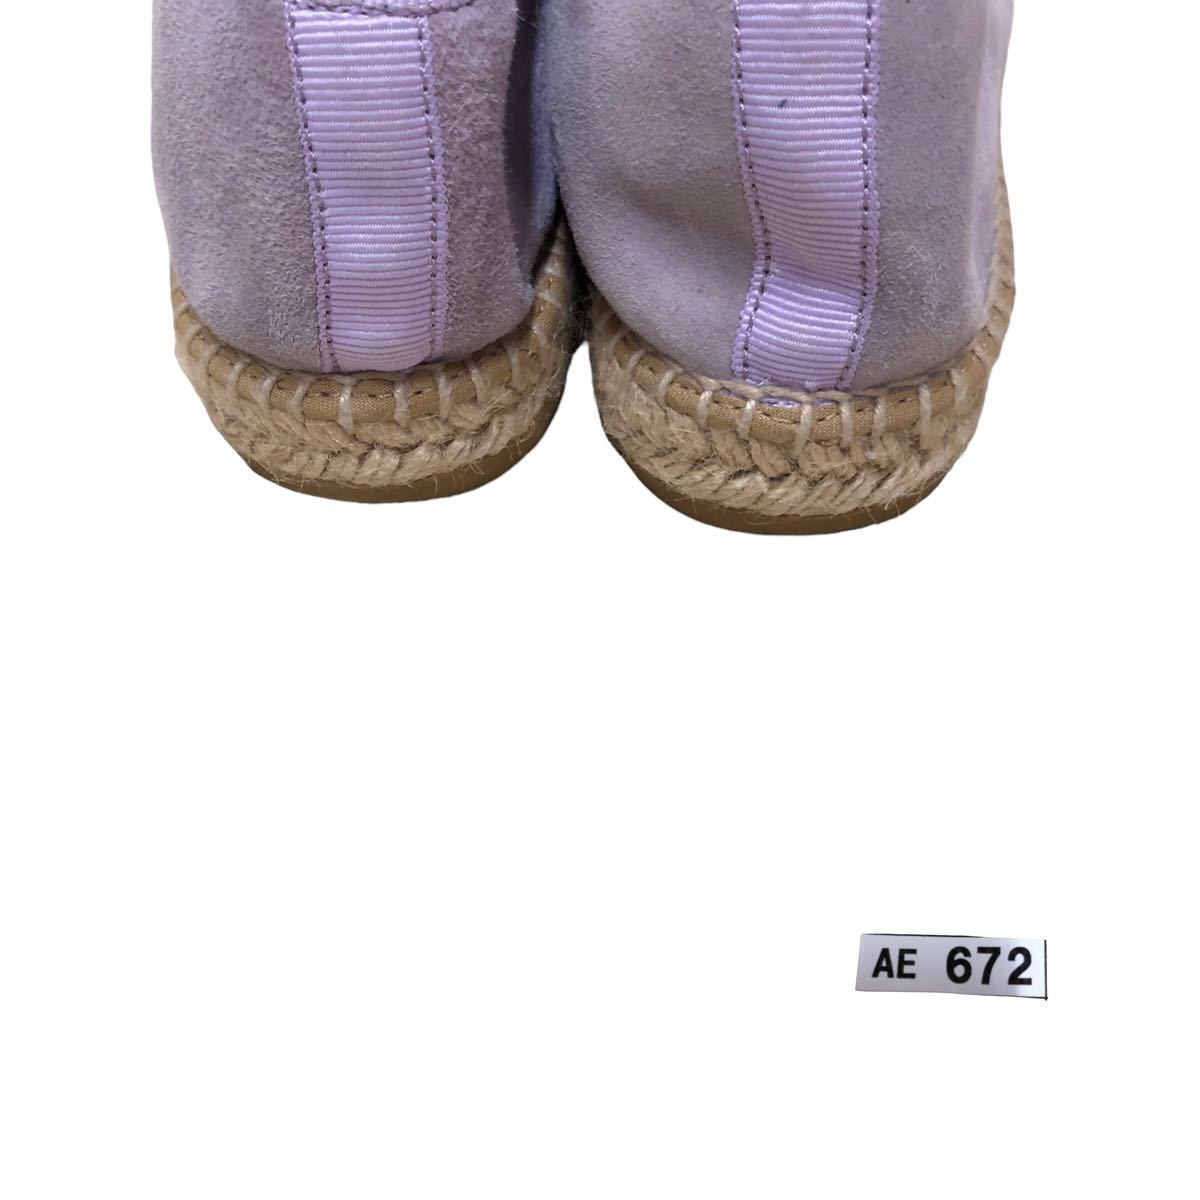 AE672 Spain made KANNA espadrille bit Loafer pumps 38 approximately 24cm light purple suede 